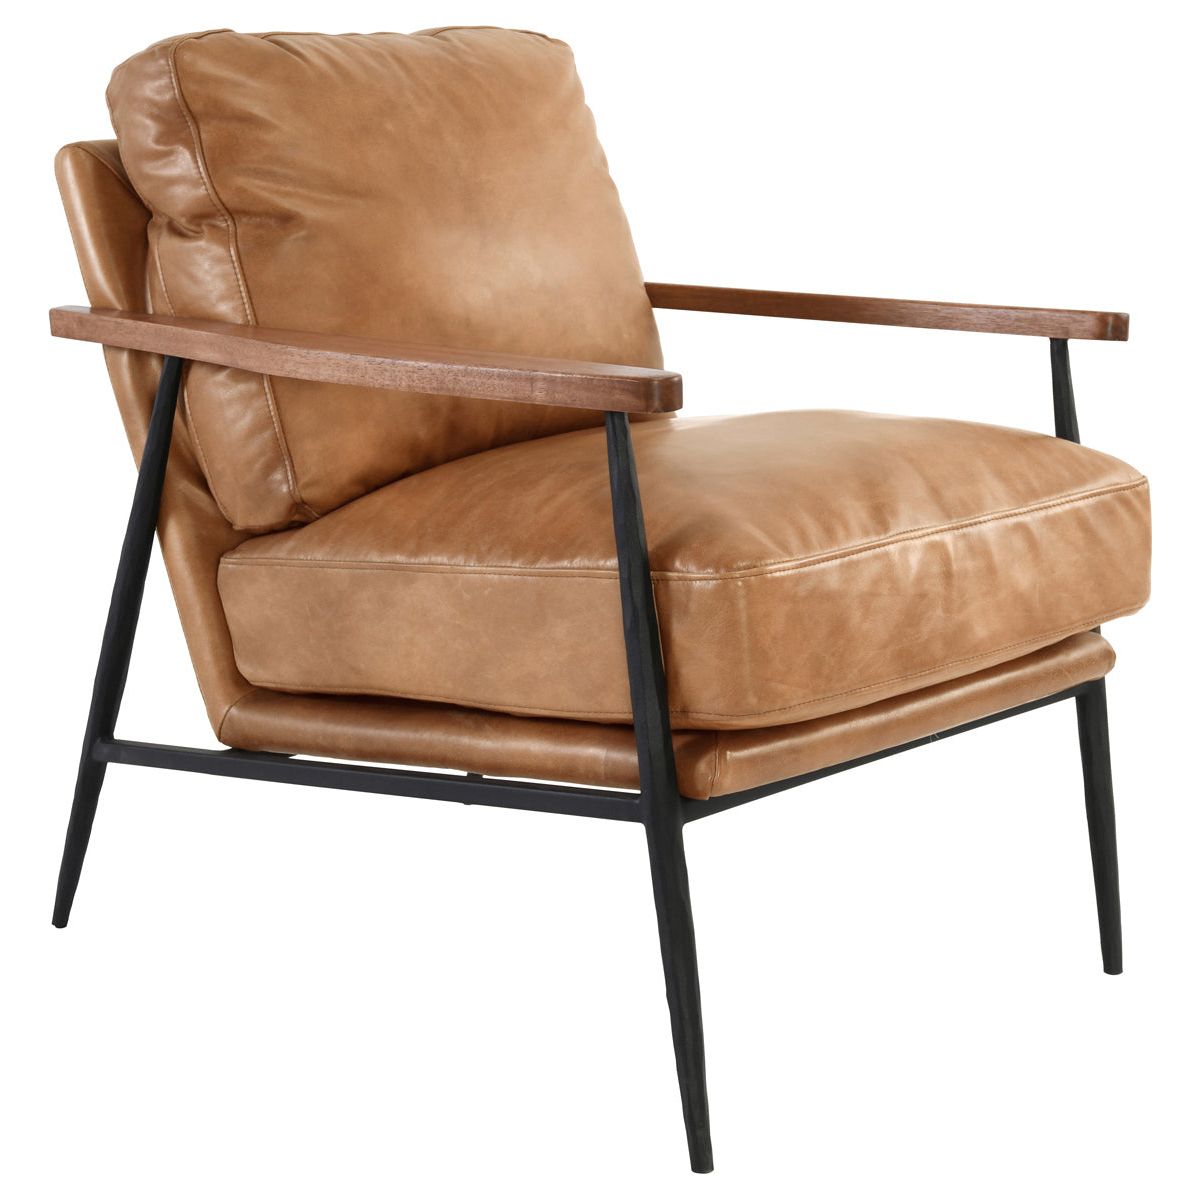 A modern armchair featuring a plush, tan Gimbal Leather Accent Chair cushioned seat and backrest, with a sleek black metal frame and wooden armrests. The chair's design combines elements of industrial and contemporary styles.